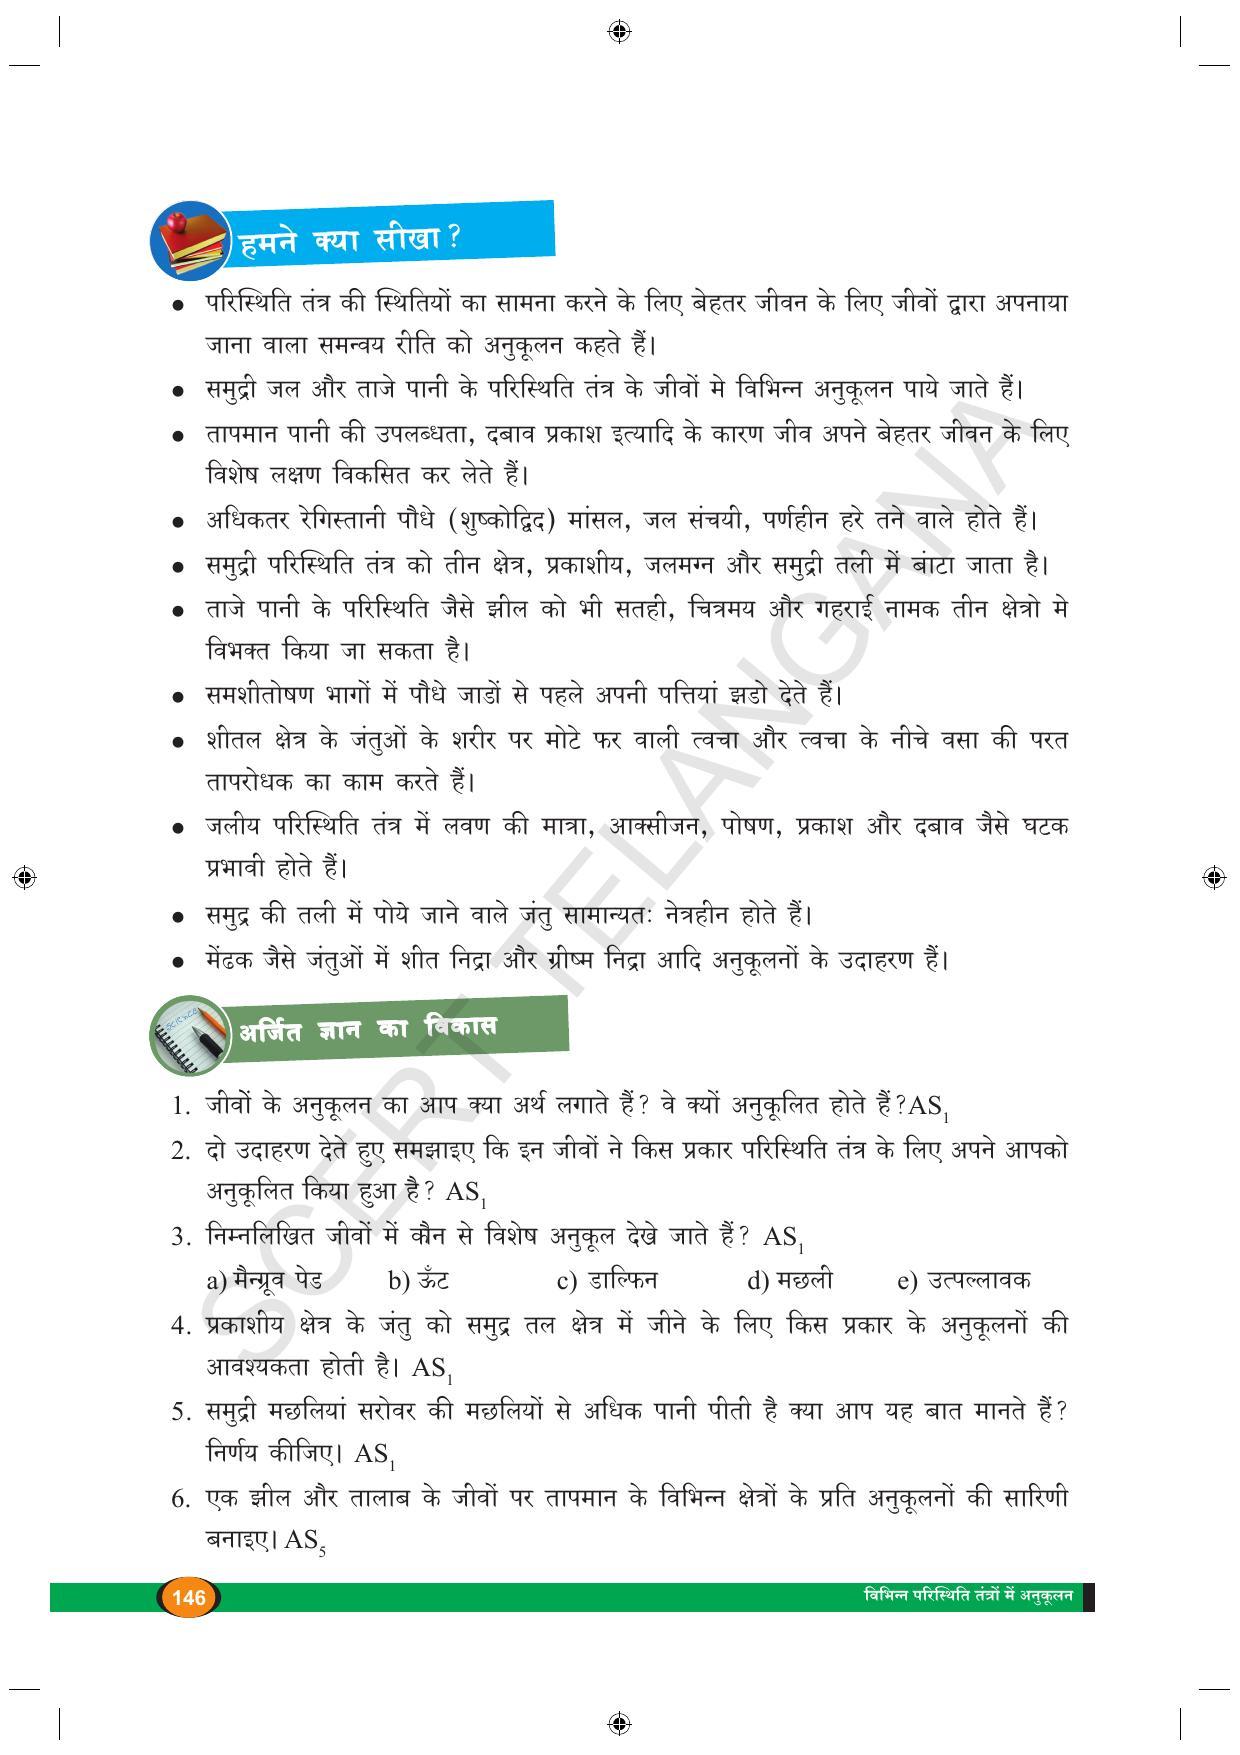 TS SCERT Class 9 Biological Science (Hindi Medium) Text Book - Page 158